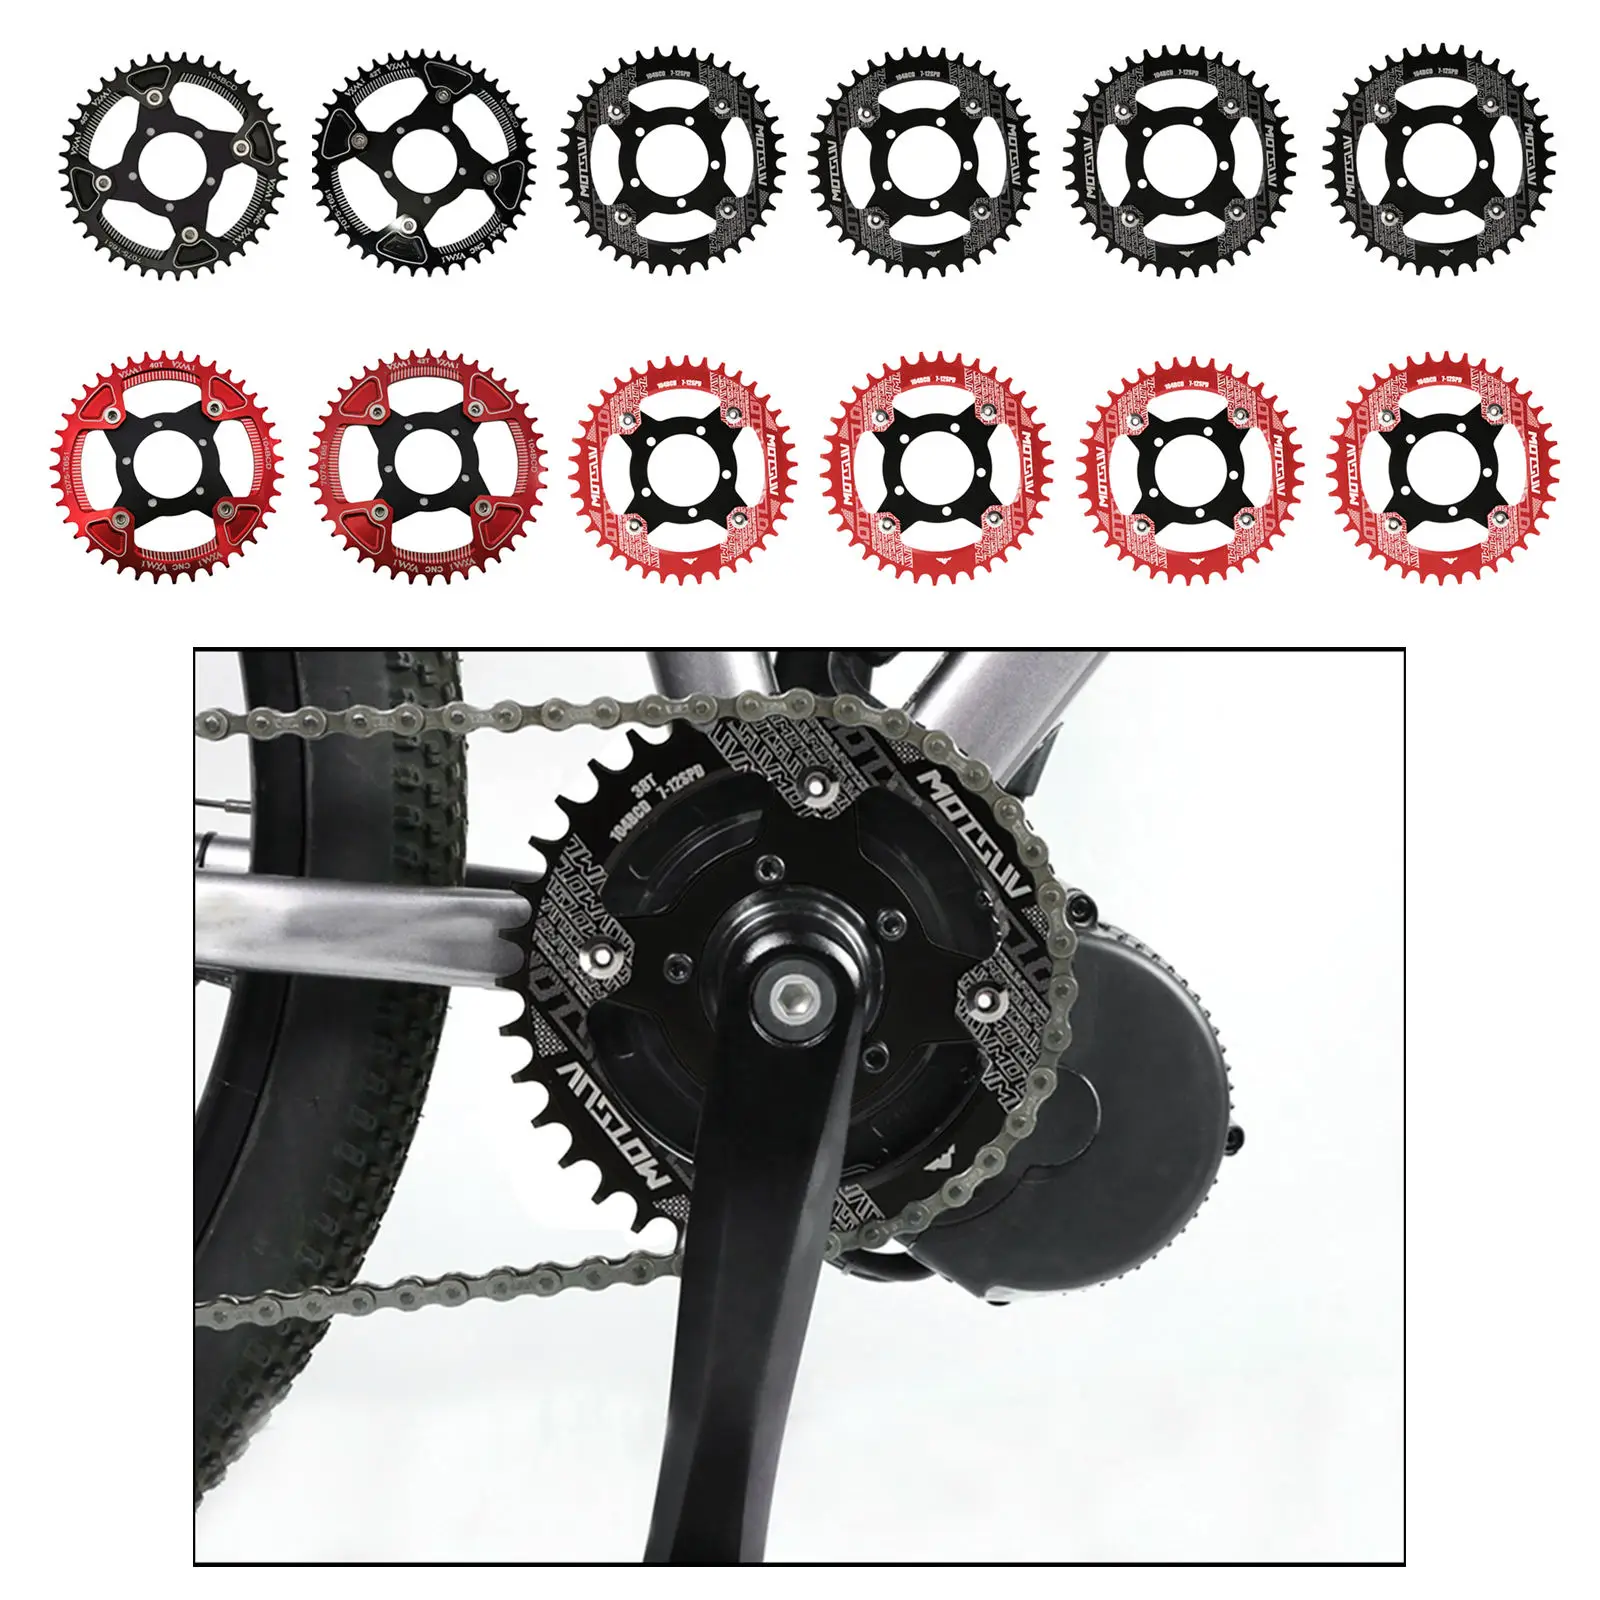 104BCD E-bike Chainring + Adapter For Bafang Mid Drive Motor Electric Bicycle Aluminium Alloy 32T 34T 36T 38T 40T 42T